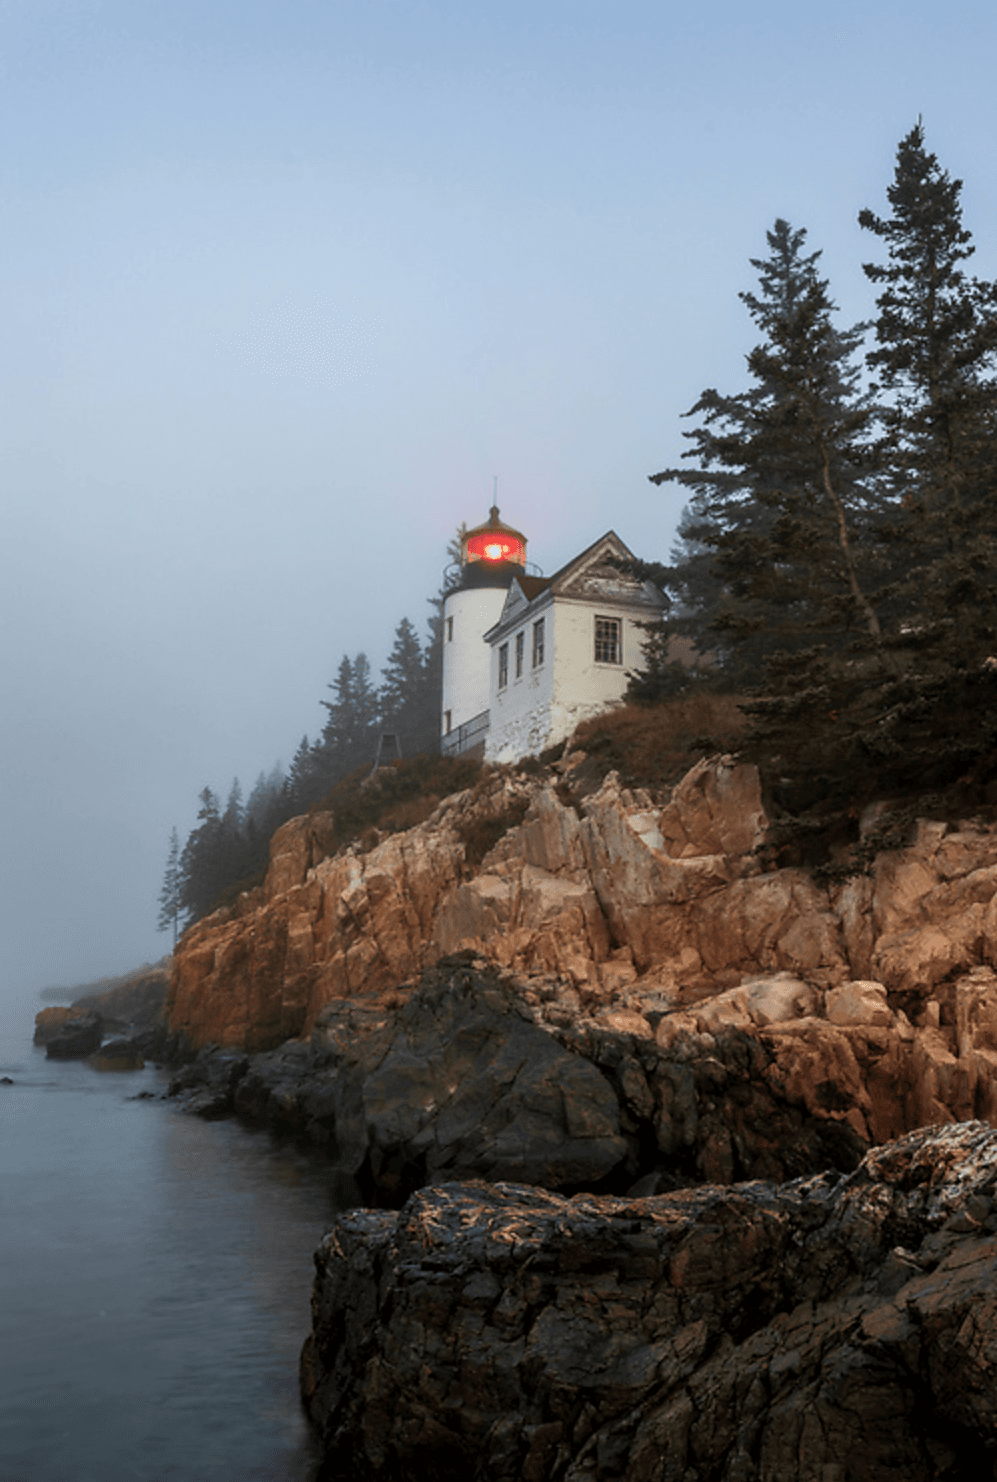 The morning fog rises over the Bass Harbor Head Lighthouse. (Peter Wood for American Essence)